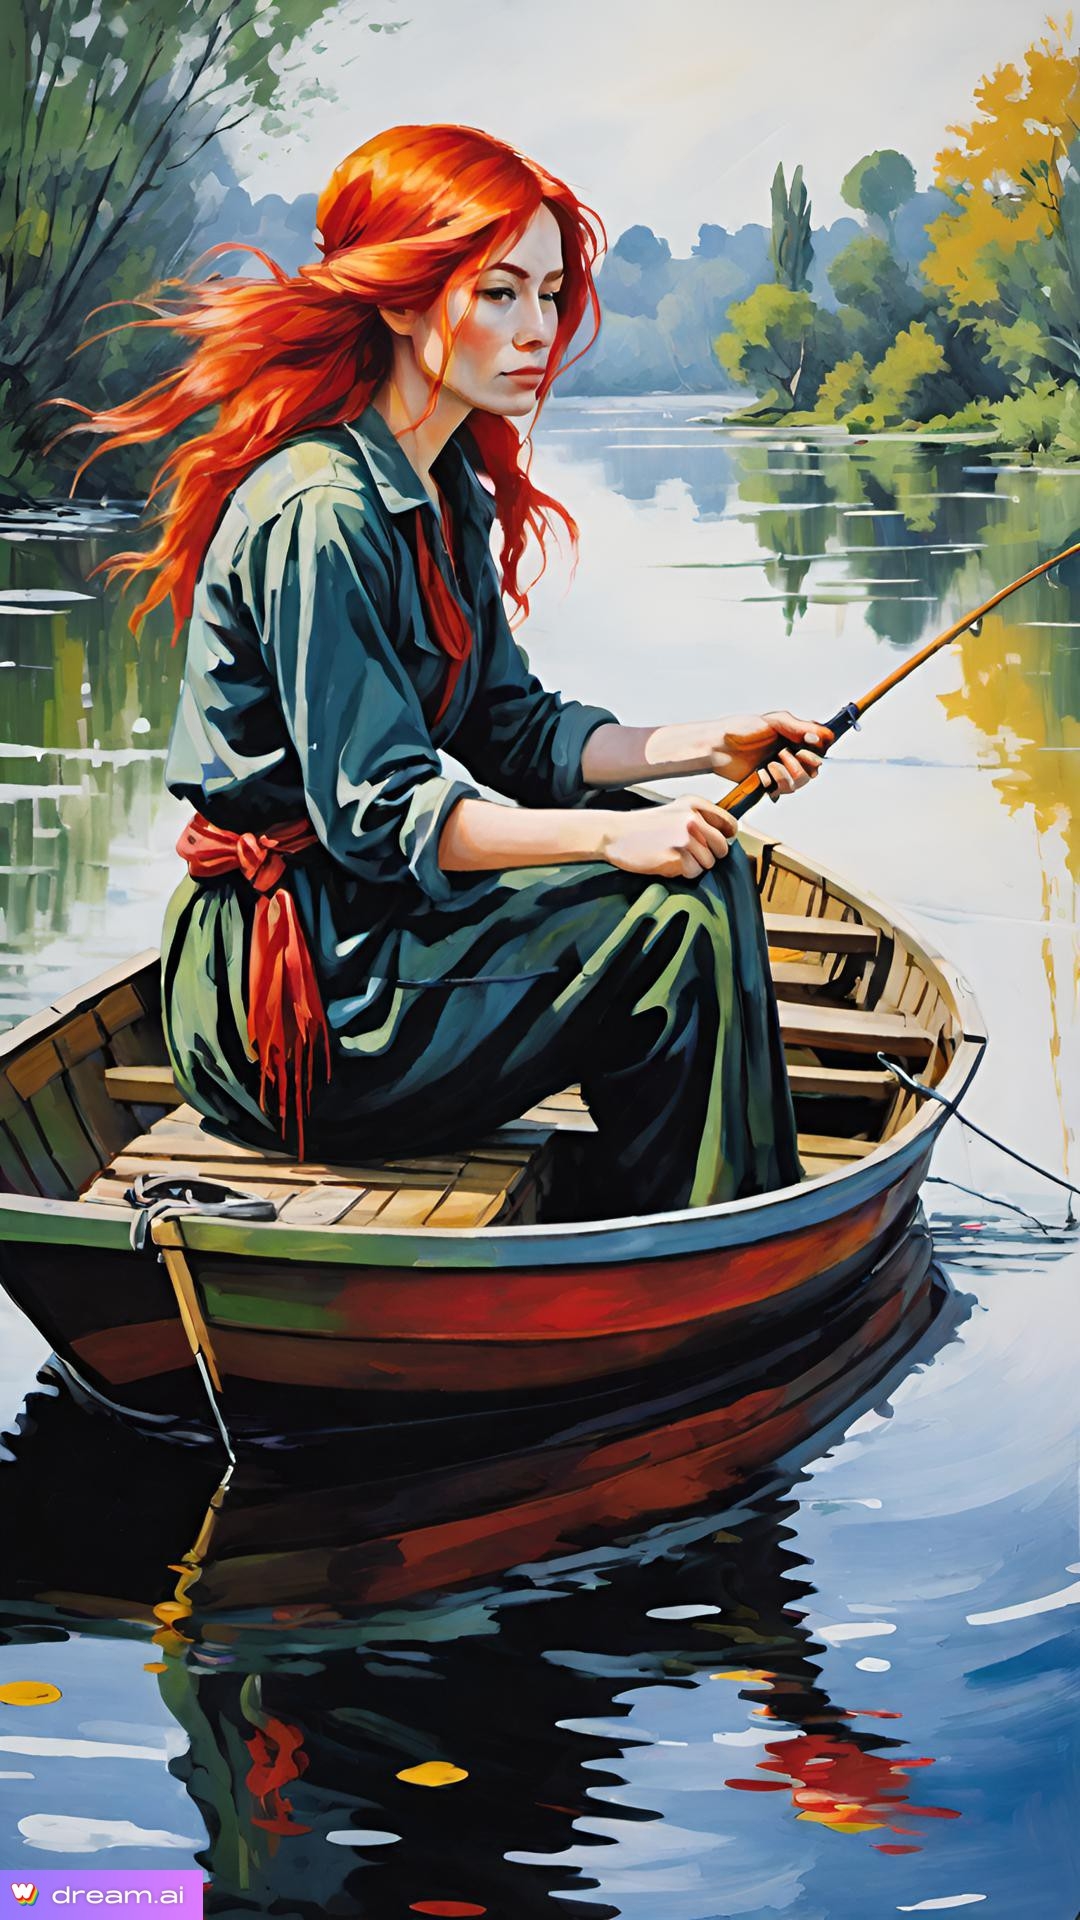 a painting of a woman fishing in a boat